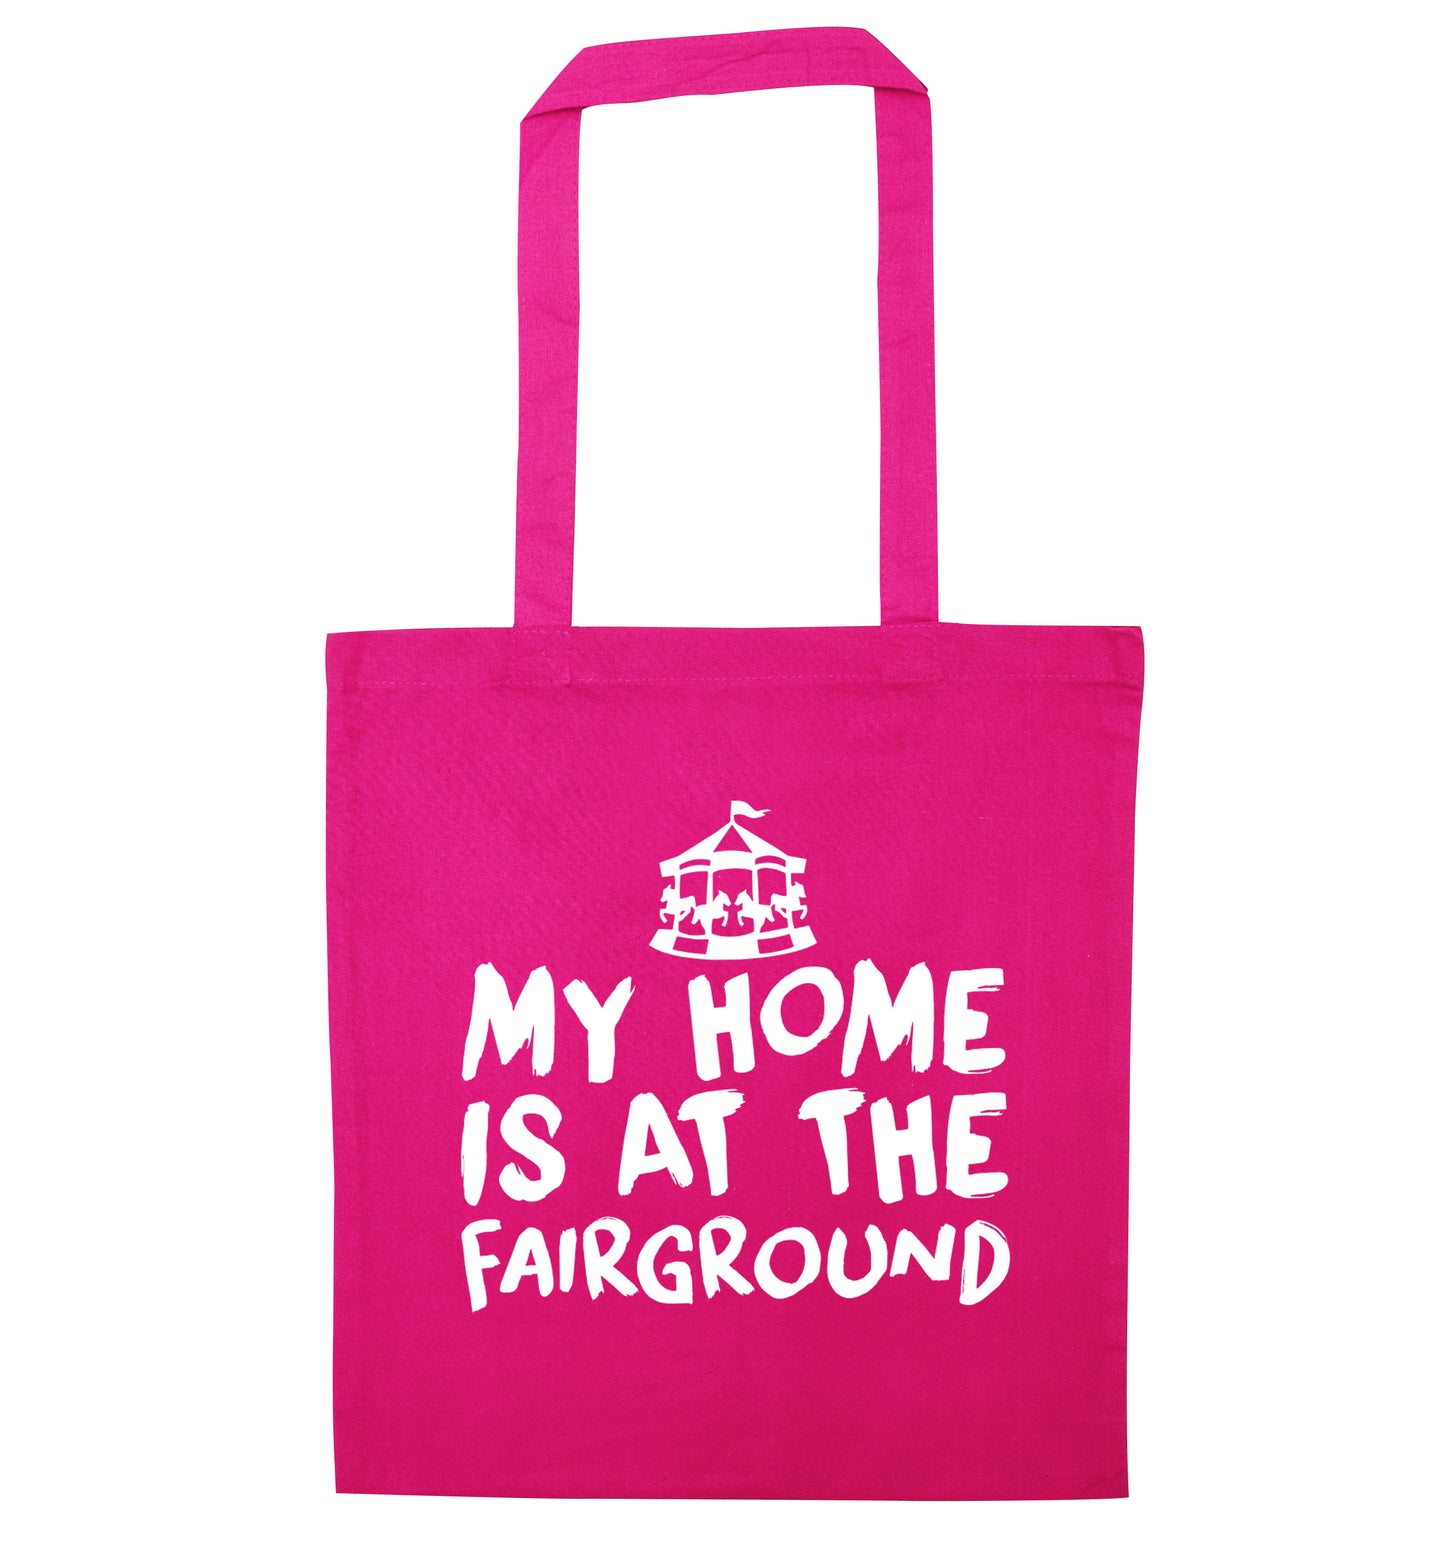 My home is at the fairground pink tote bag